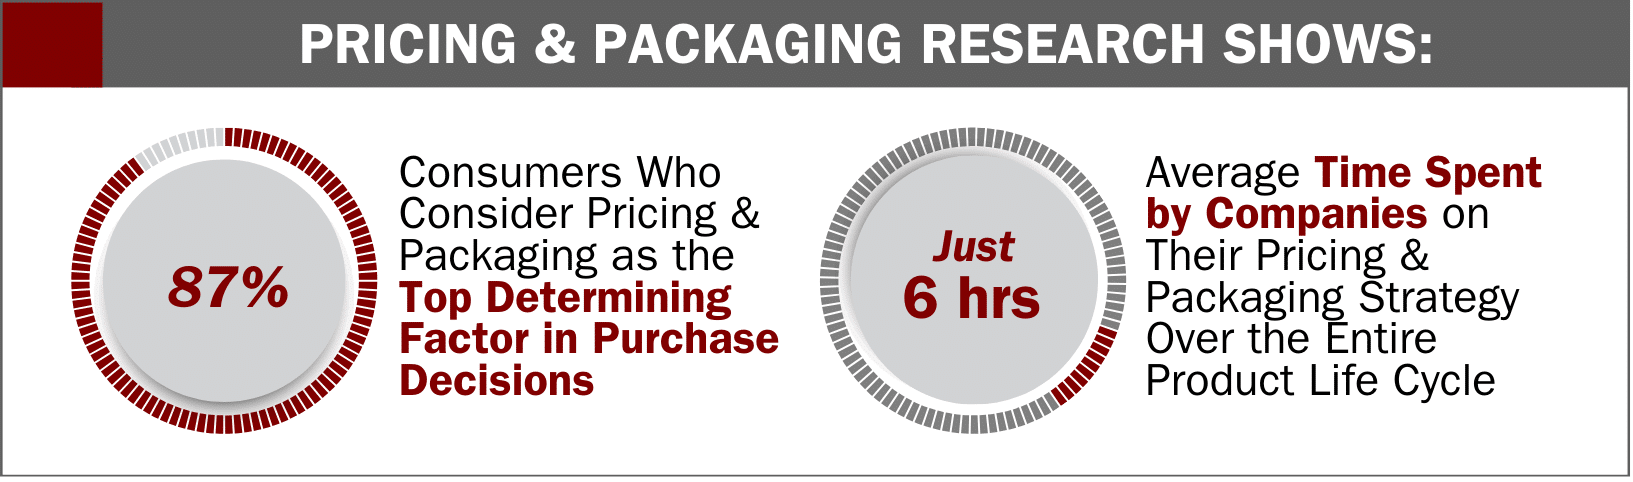 Pricing and packaging research shows that on average companies spend only six hours over the entire life cycle of their product developing their pricing and packaging strategy, in contrast with other research that indicates that pricing and packaging is the top determining factor for 87% of customers when making purchasing decisions.